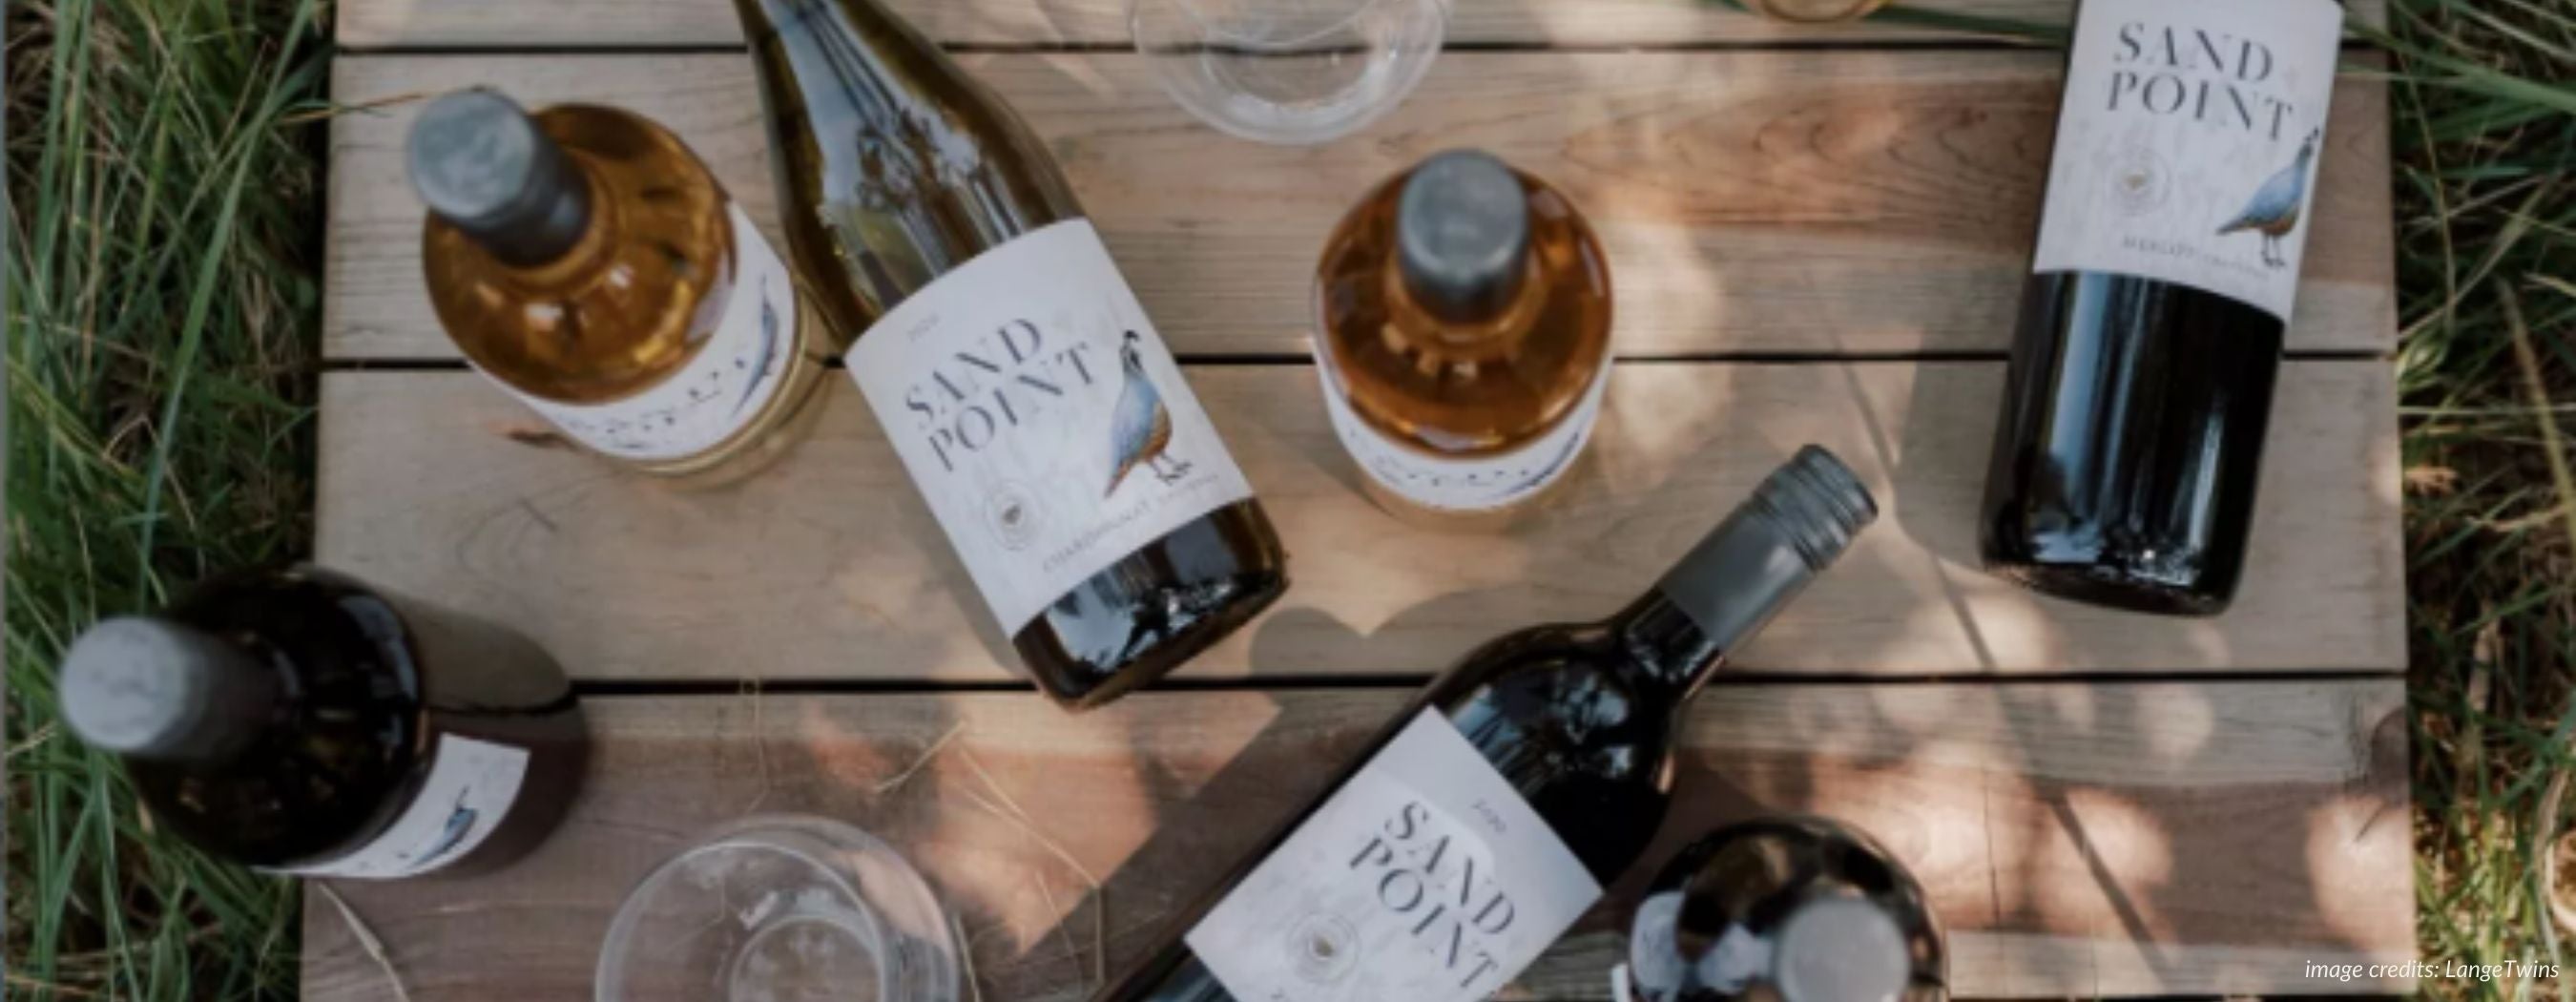 sand point california wines on a wooden table flatlay